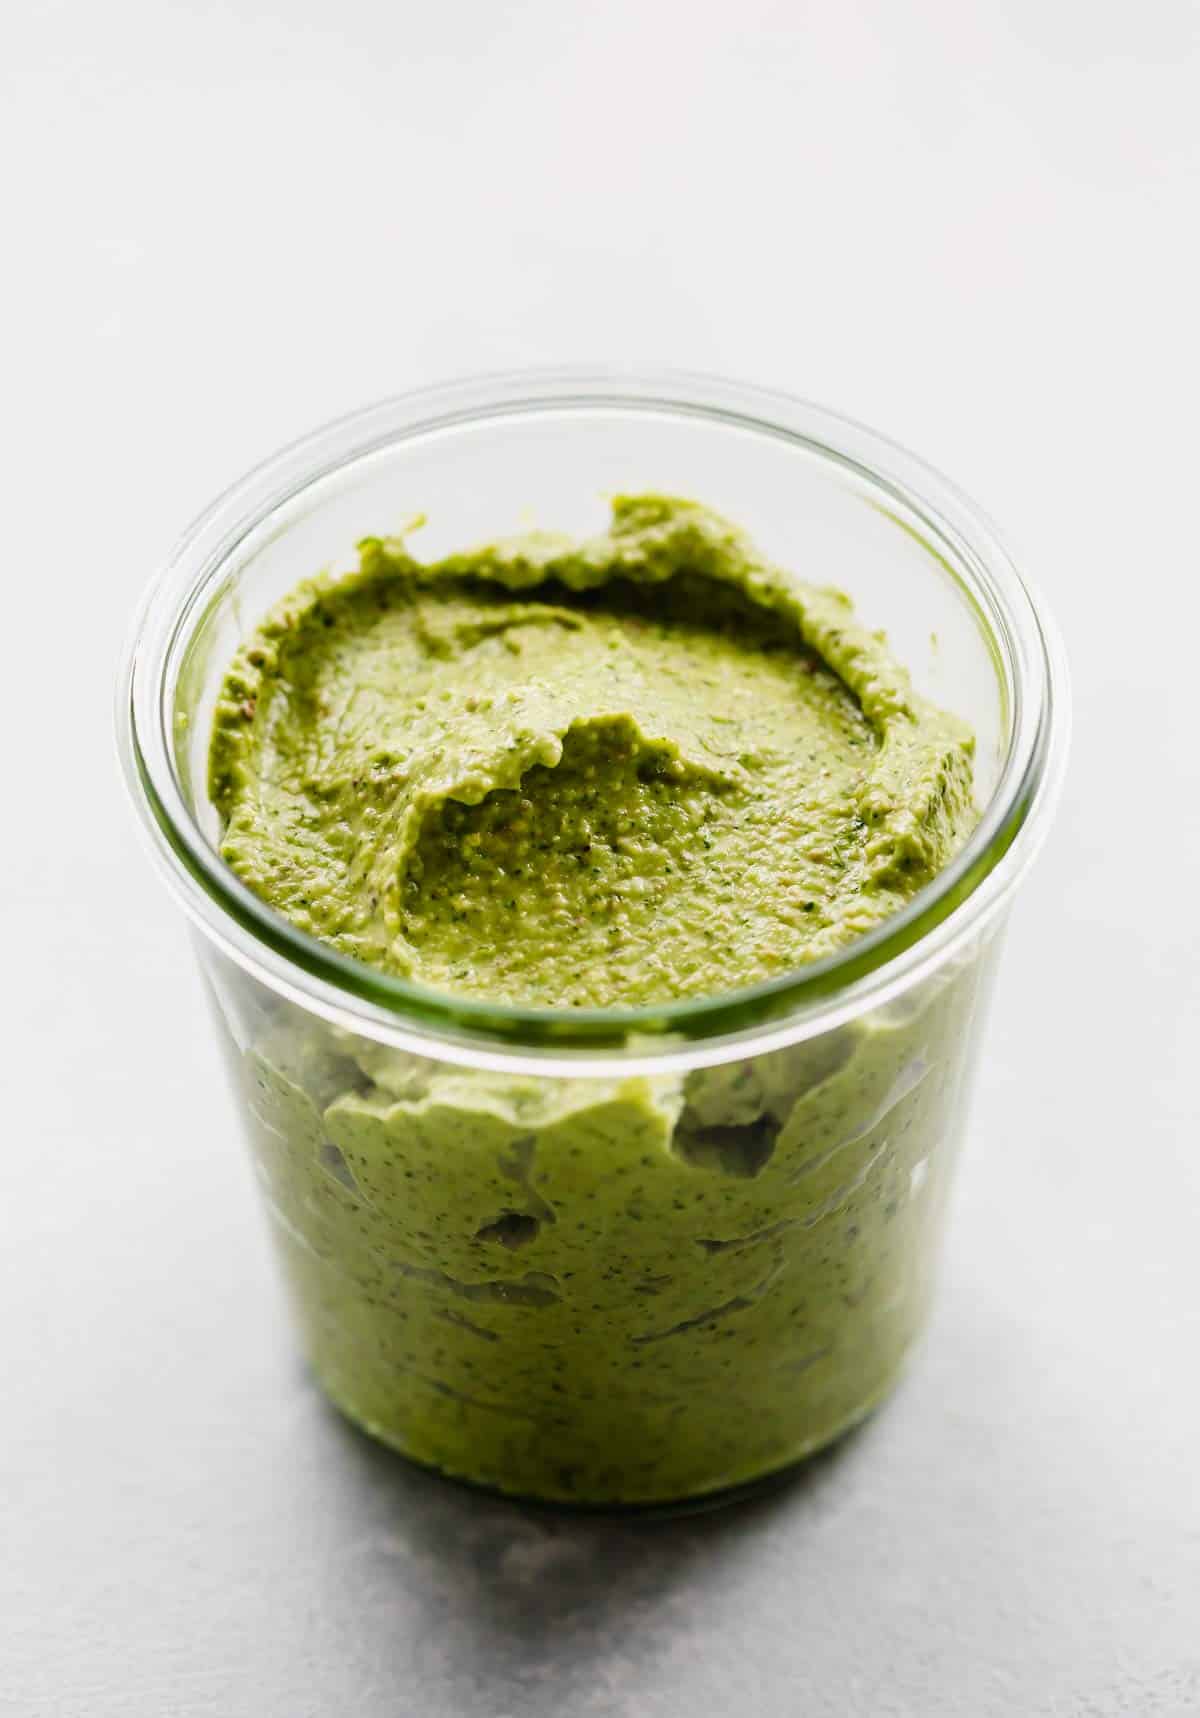 A glass jar filled with a thick Green Sauce Recipe in it.